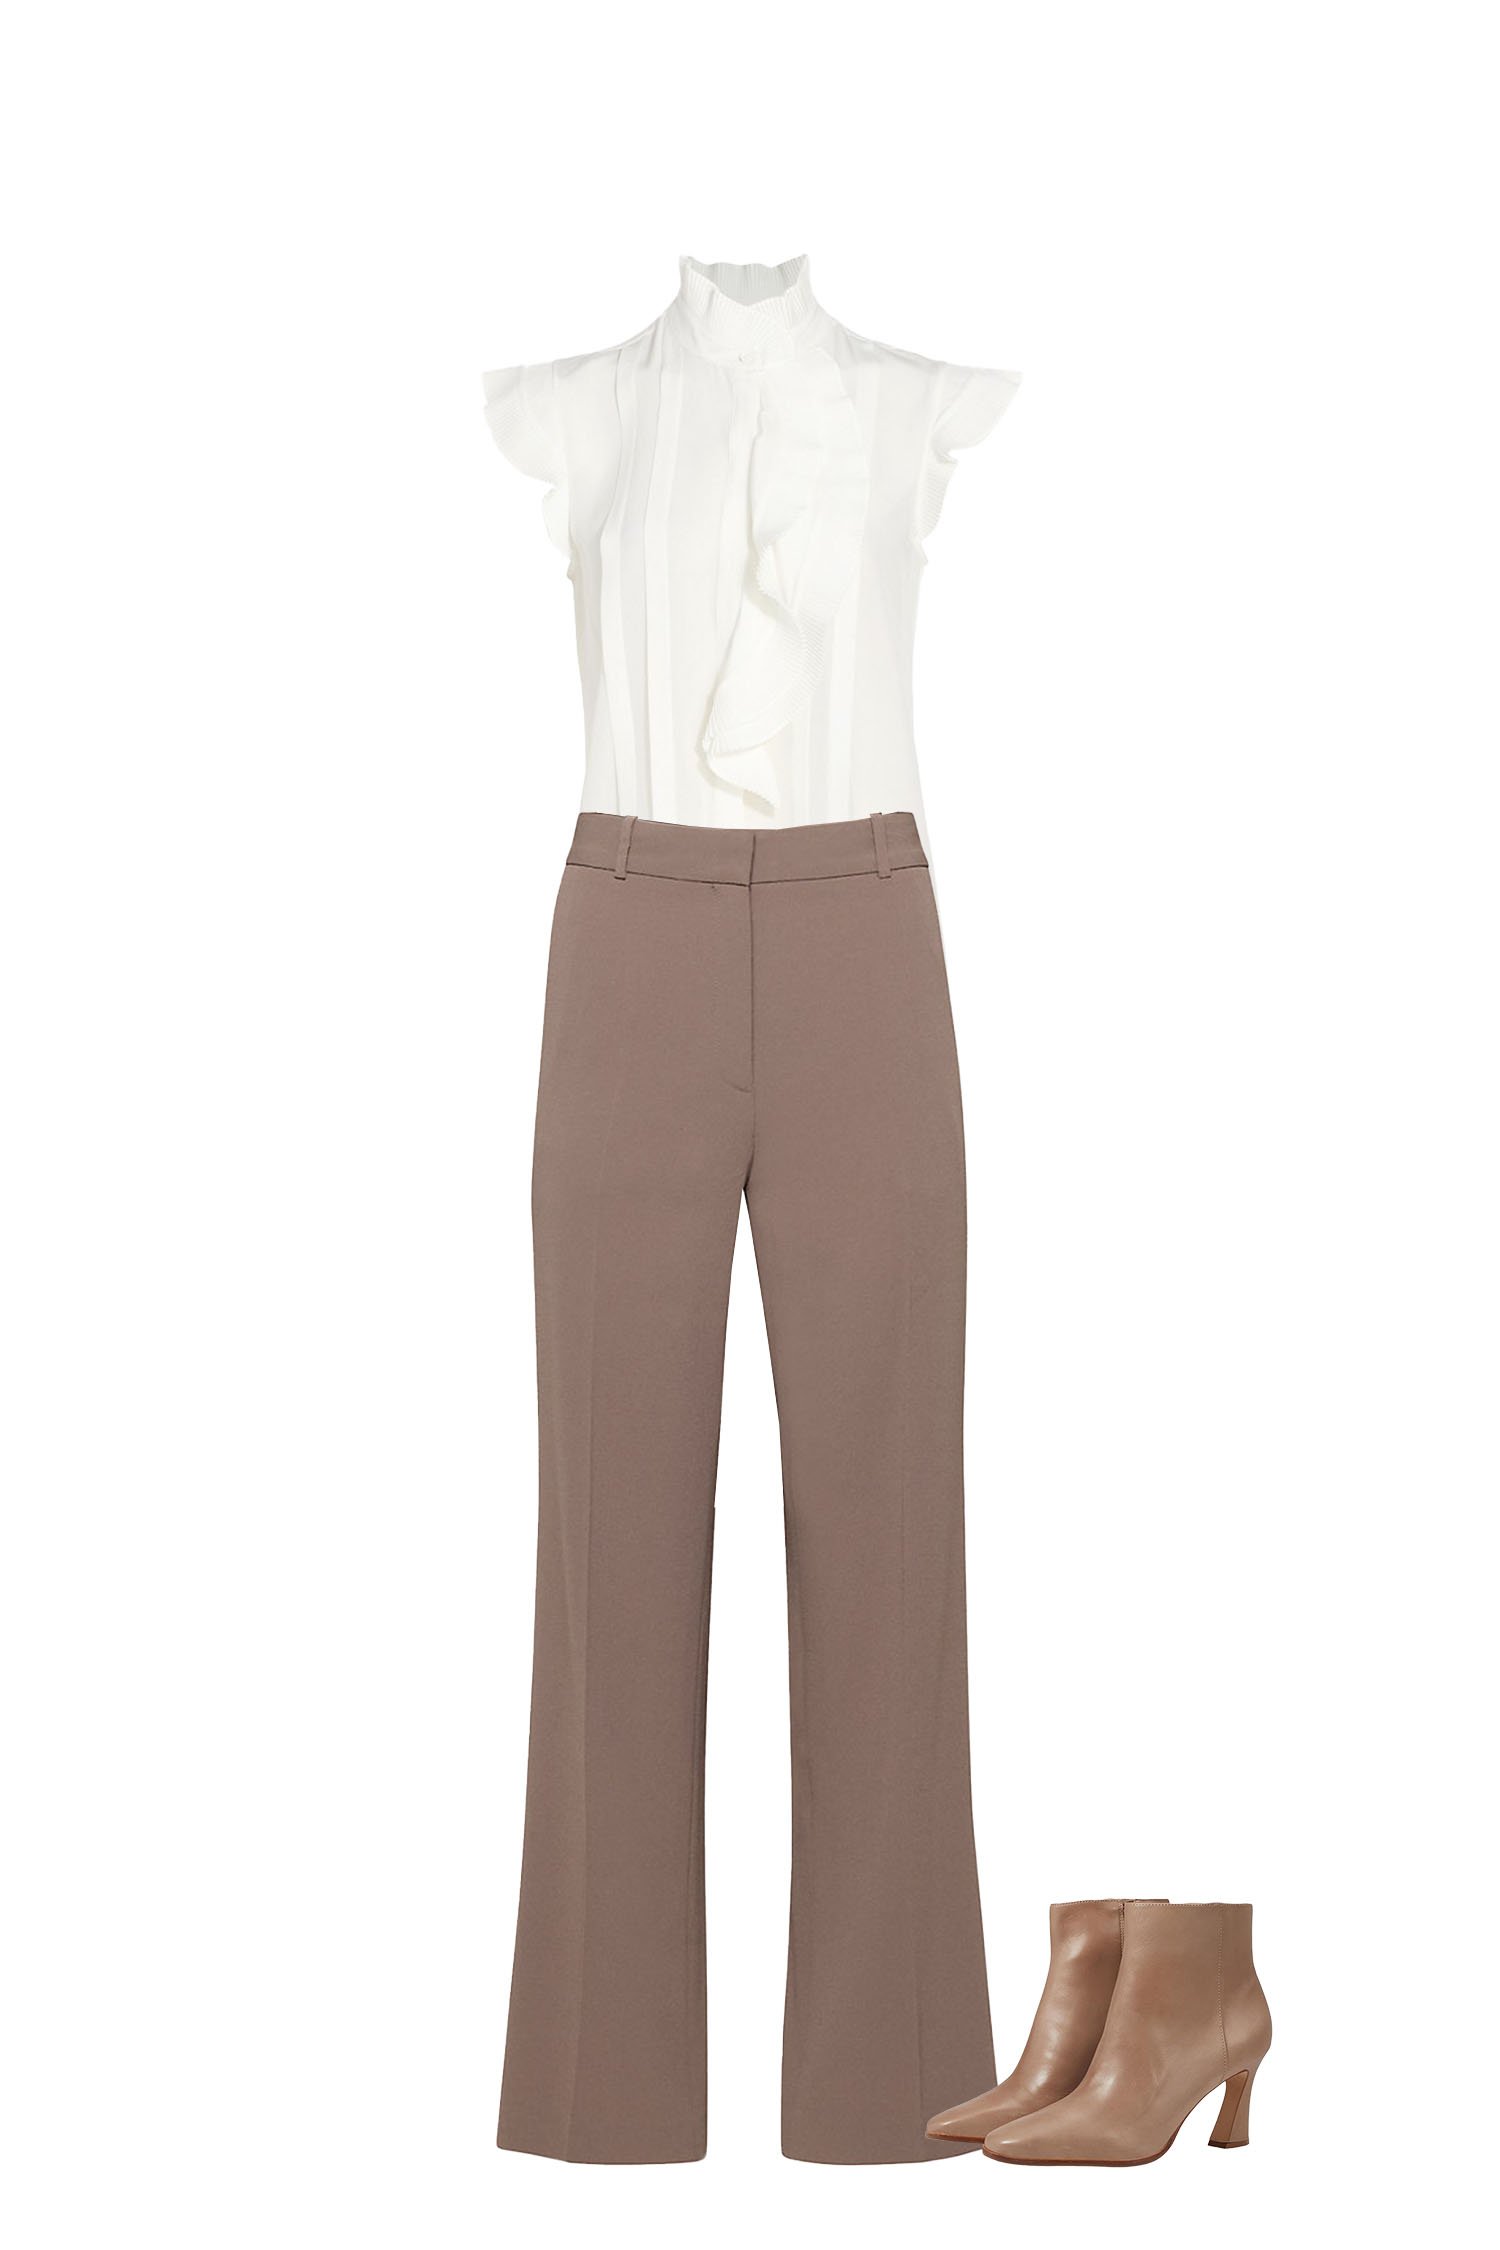 Business Casual Outfit - Deep Taupe High-Waisted Wide Leg Pants, White Sleevless Mock Neck Ruffle Top, Taupe Heeled Ankle Boots